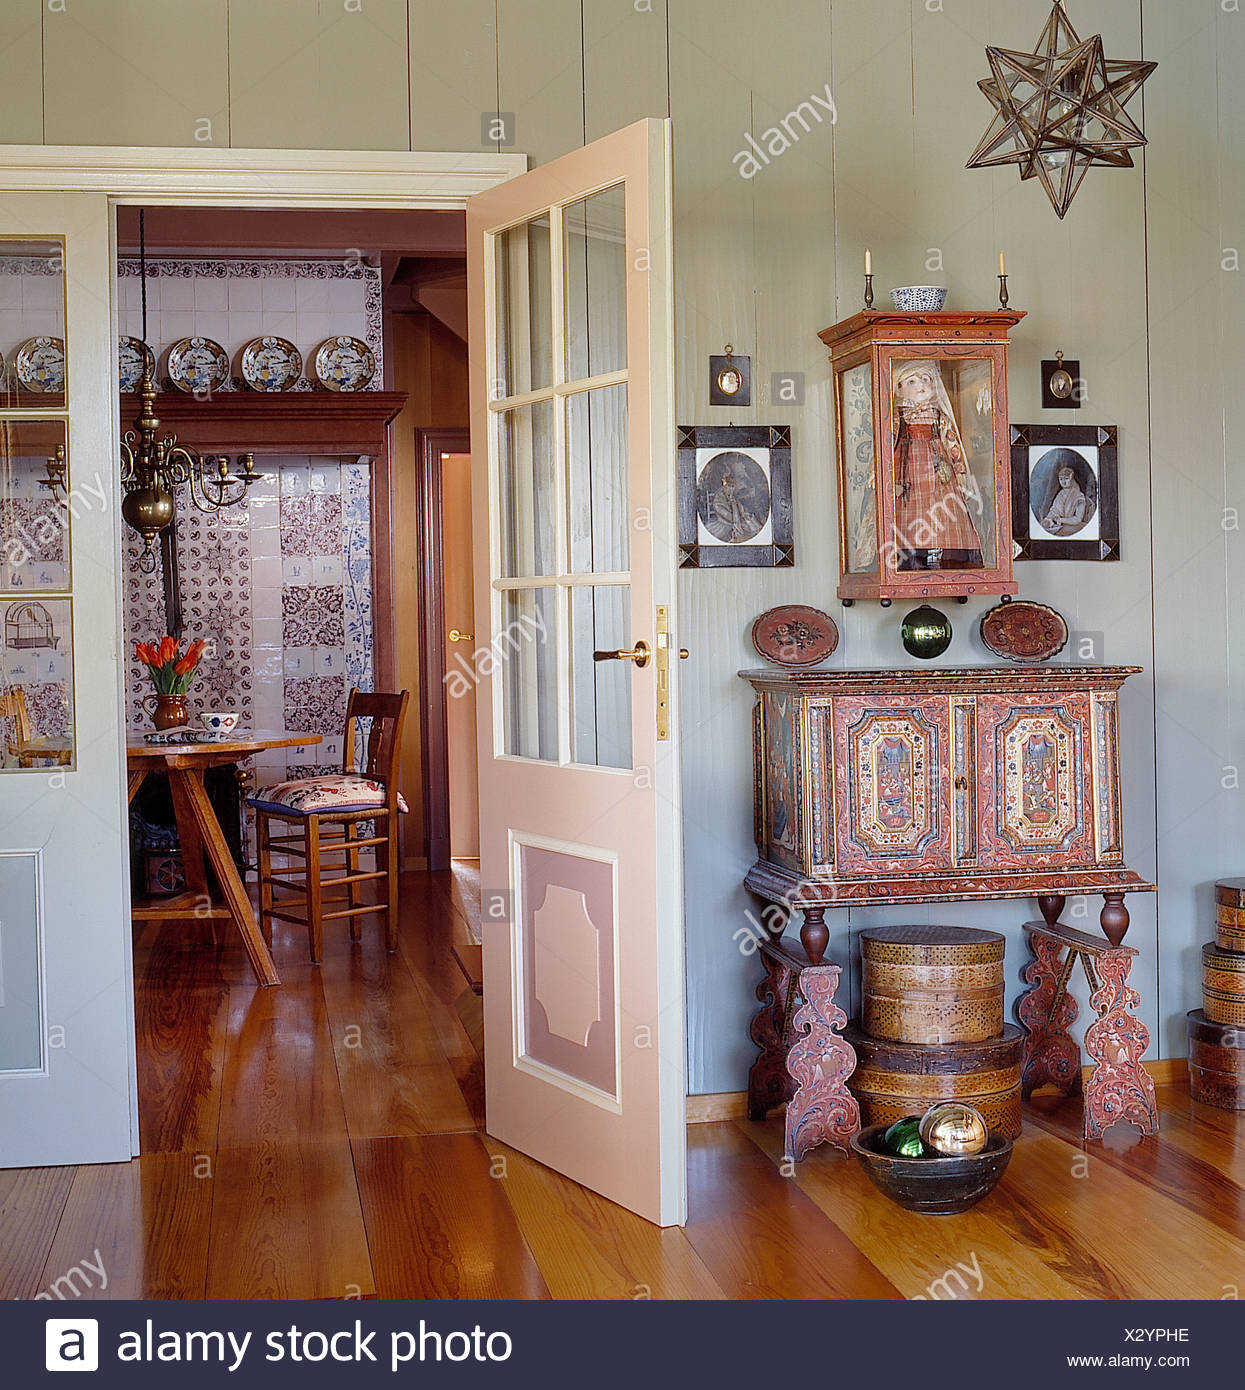 Doll In Glass Case Above Painted Dutch Style Cabinet And Wooden